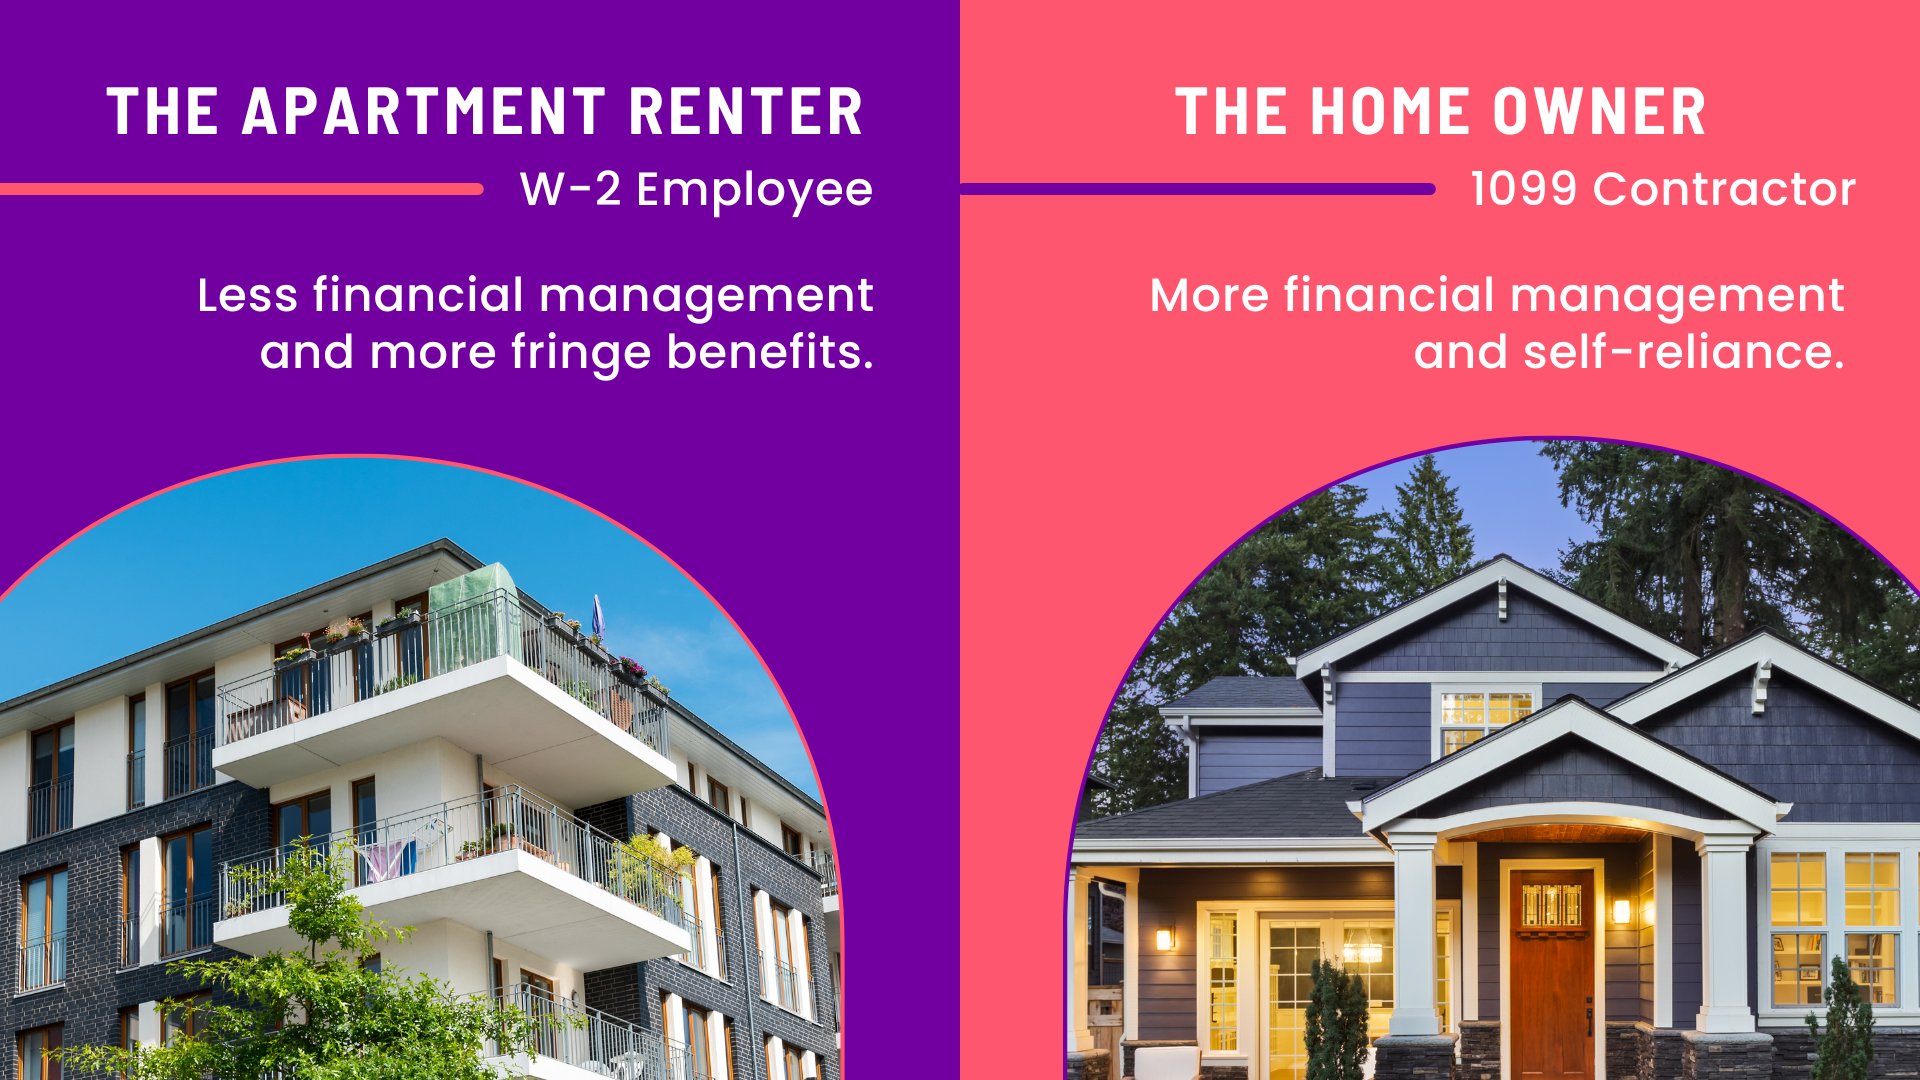 The image compares the differences between a W-2 employee and 1099 contractors using an apartment renter versus a homeowner analogy.